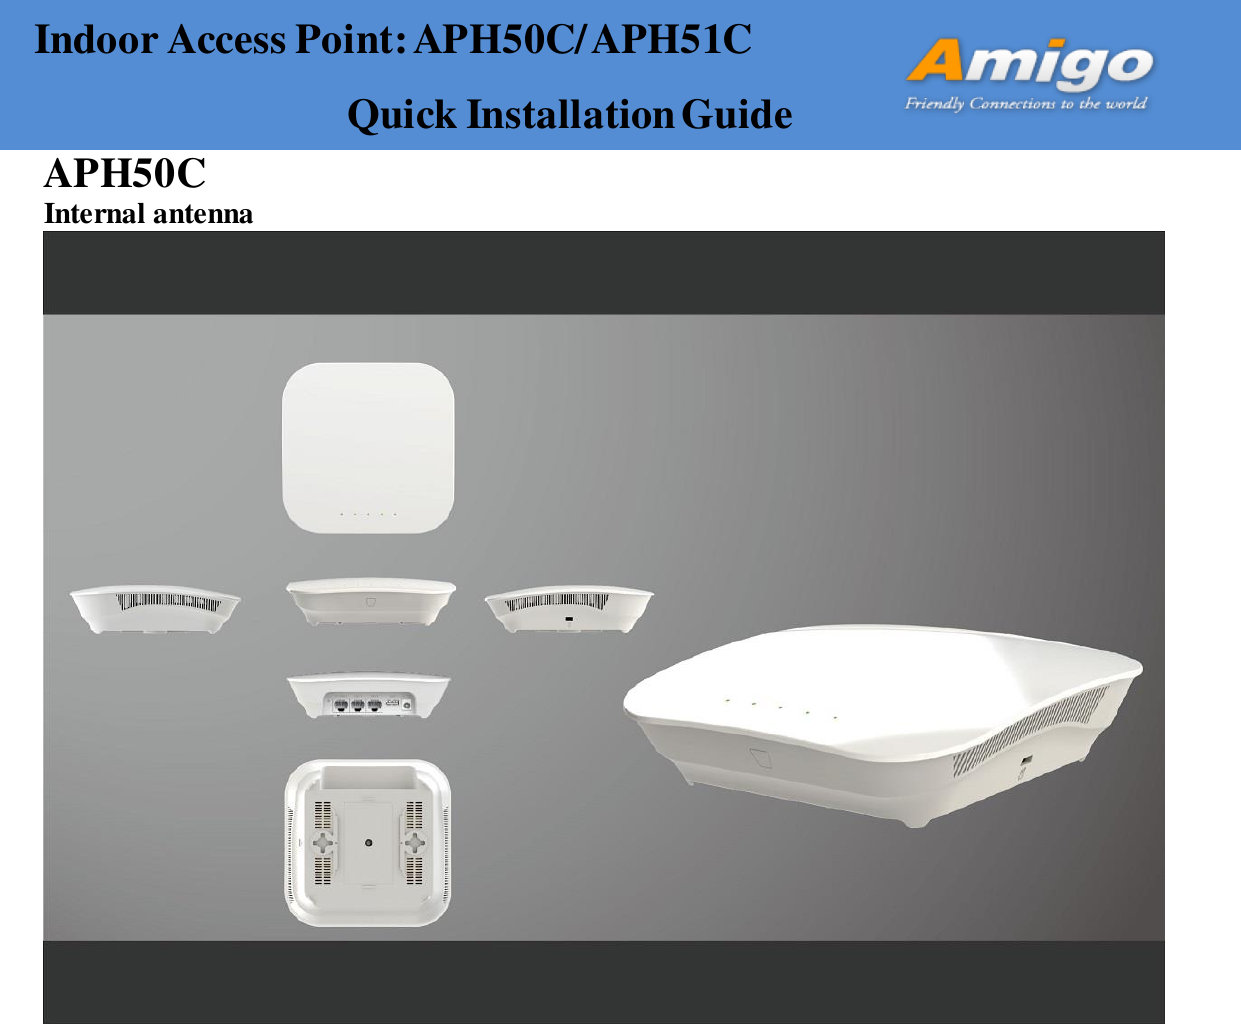  APH50C Internal antenna   Indoor Access Point: APH50C/ APH51C Quick Installation Guide 